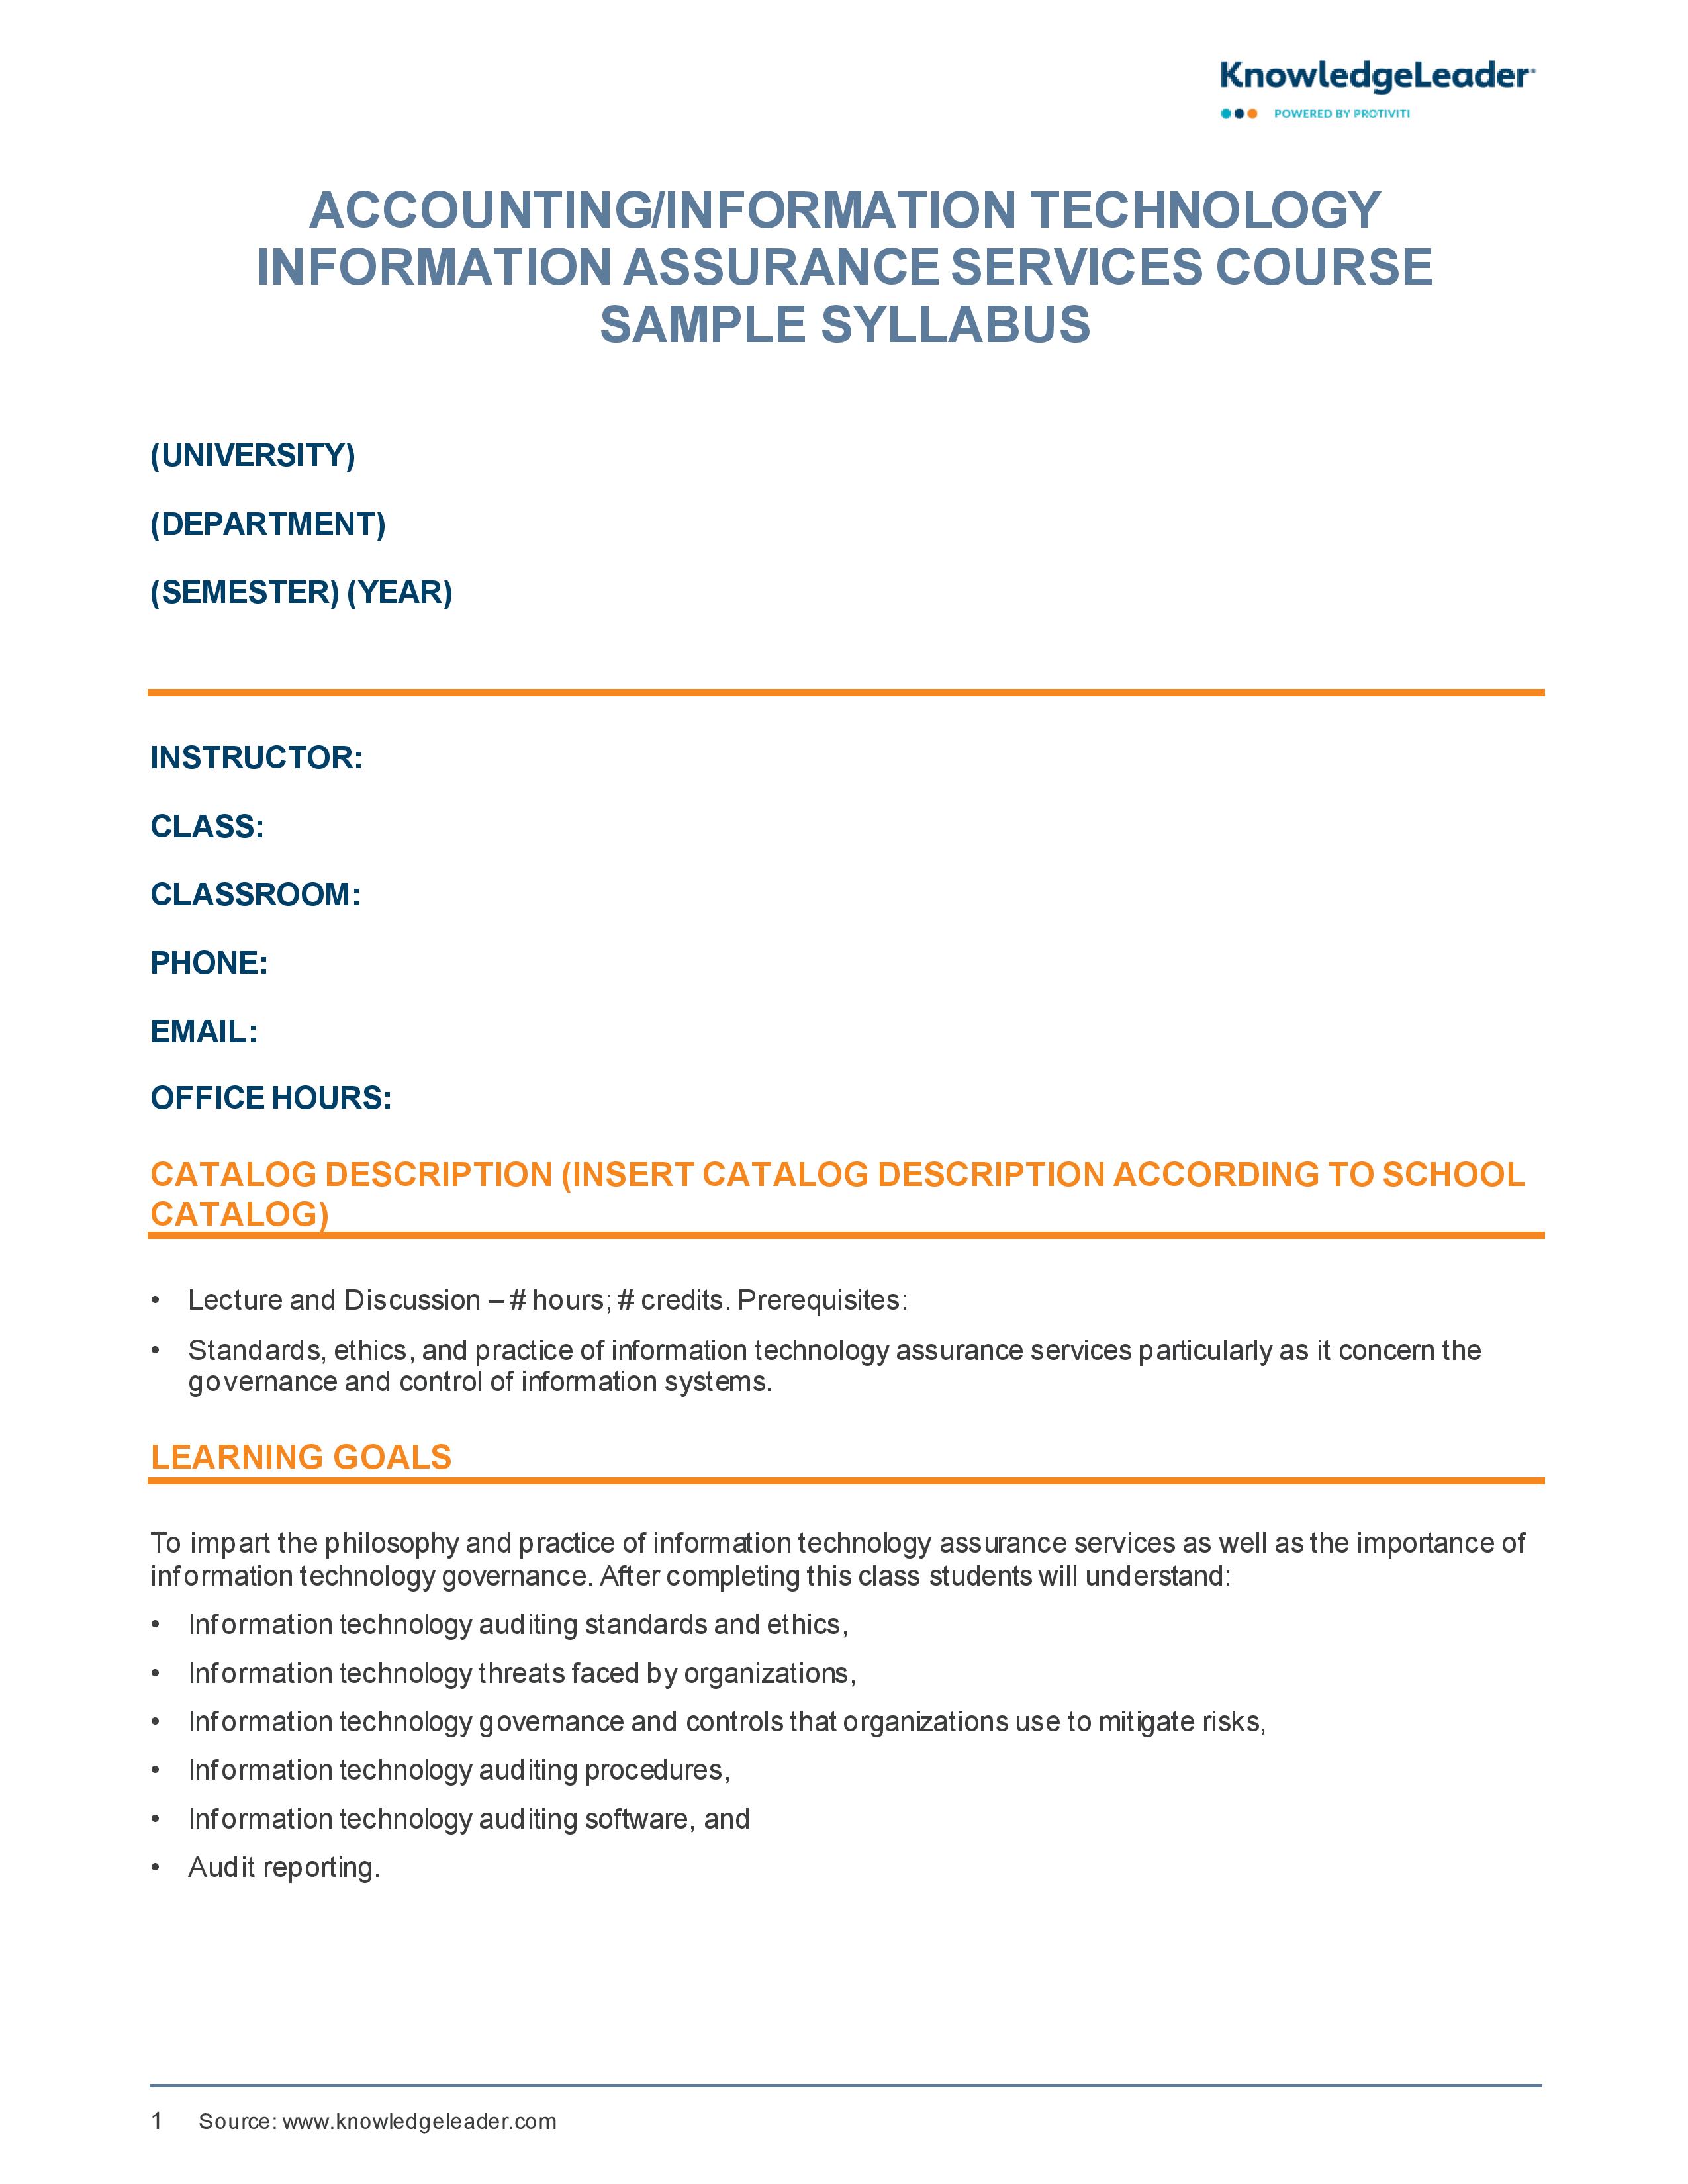 Screenshot of the first page of Accounting Information Technology Information Assurance Services Sample Syllabus